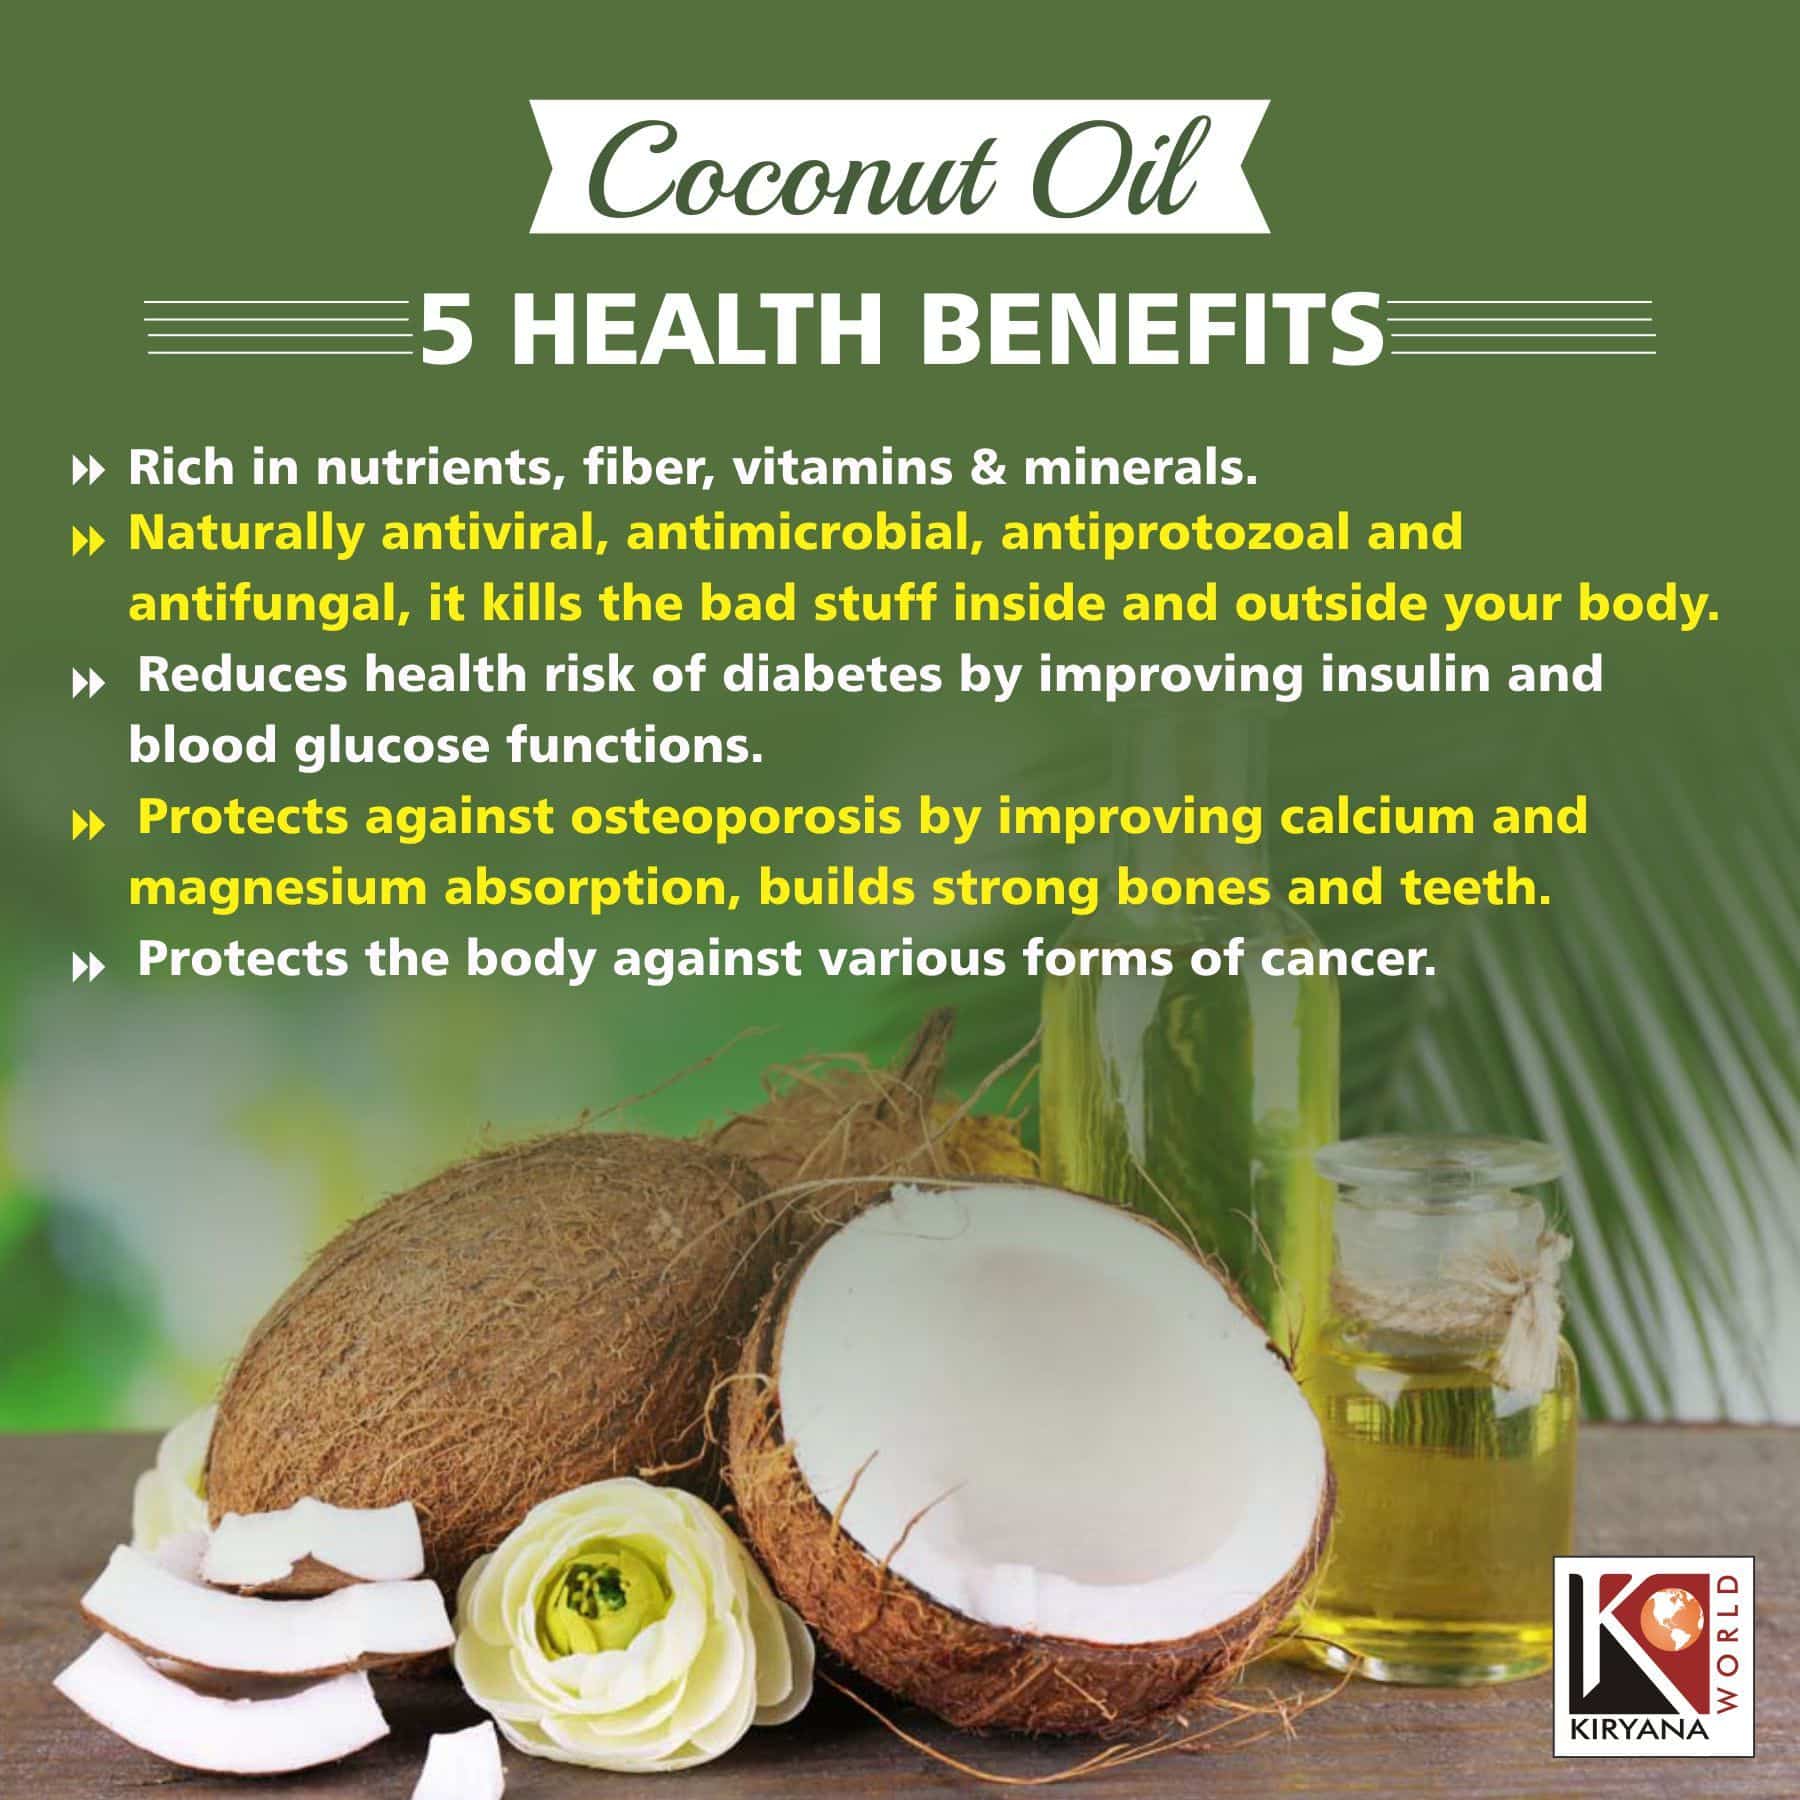 Coconut oil is good for skin care, hair care, improving digestion and ...